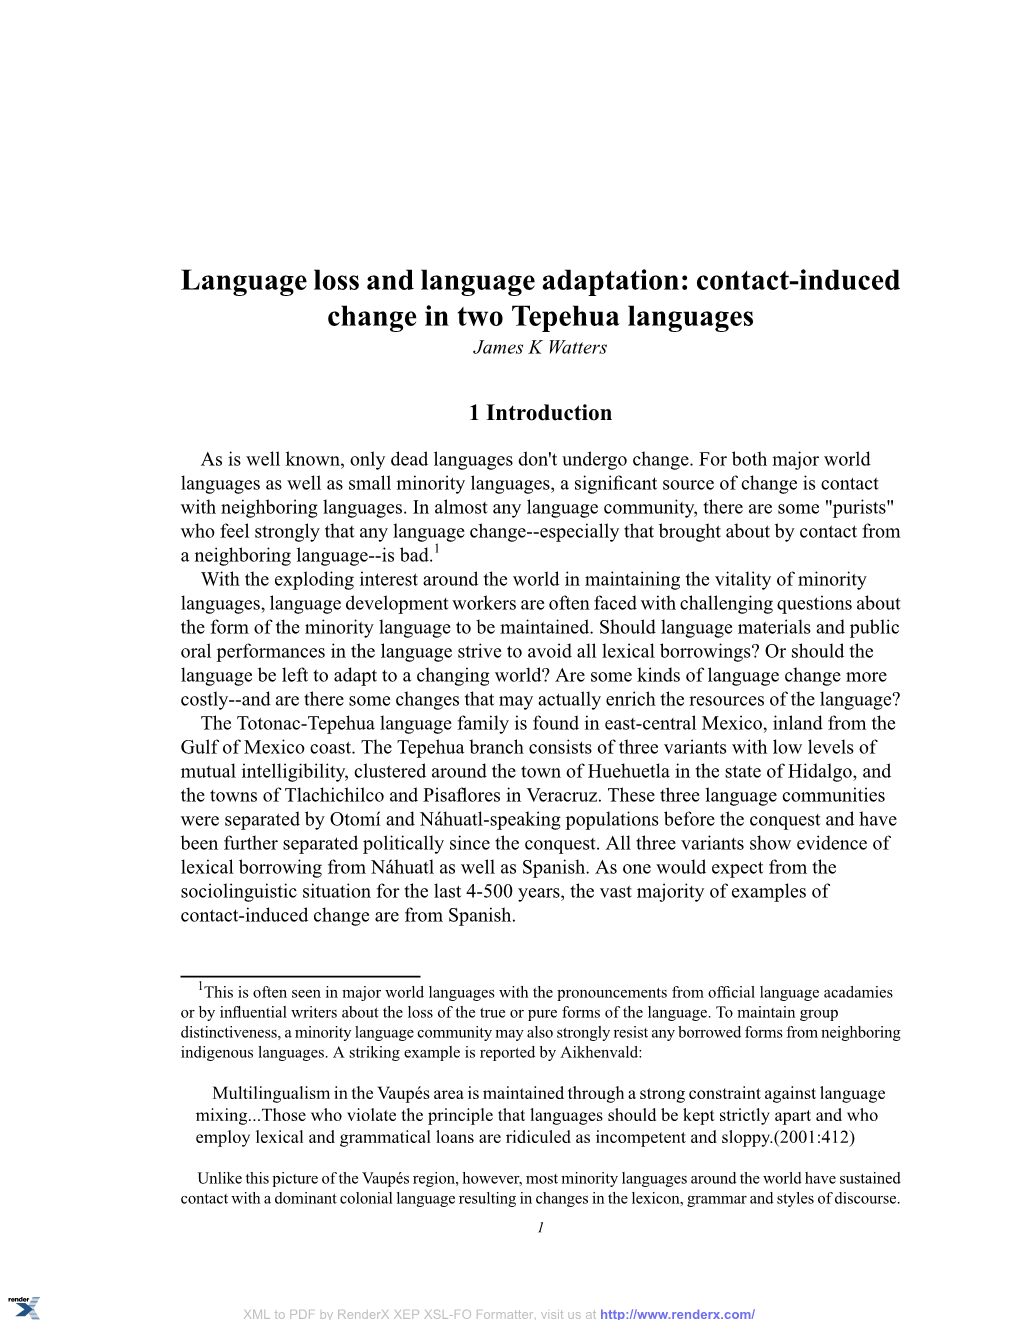 Contact-Induced Change in Two Tepehua Languages James K Watters